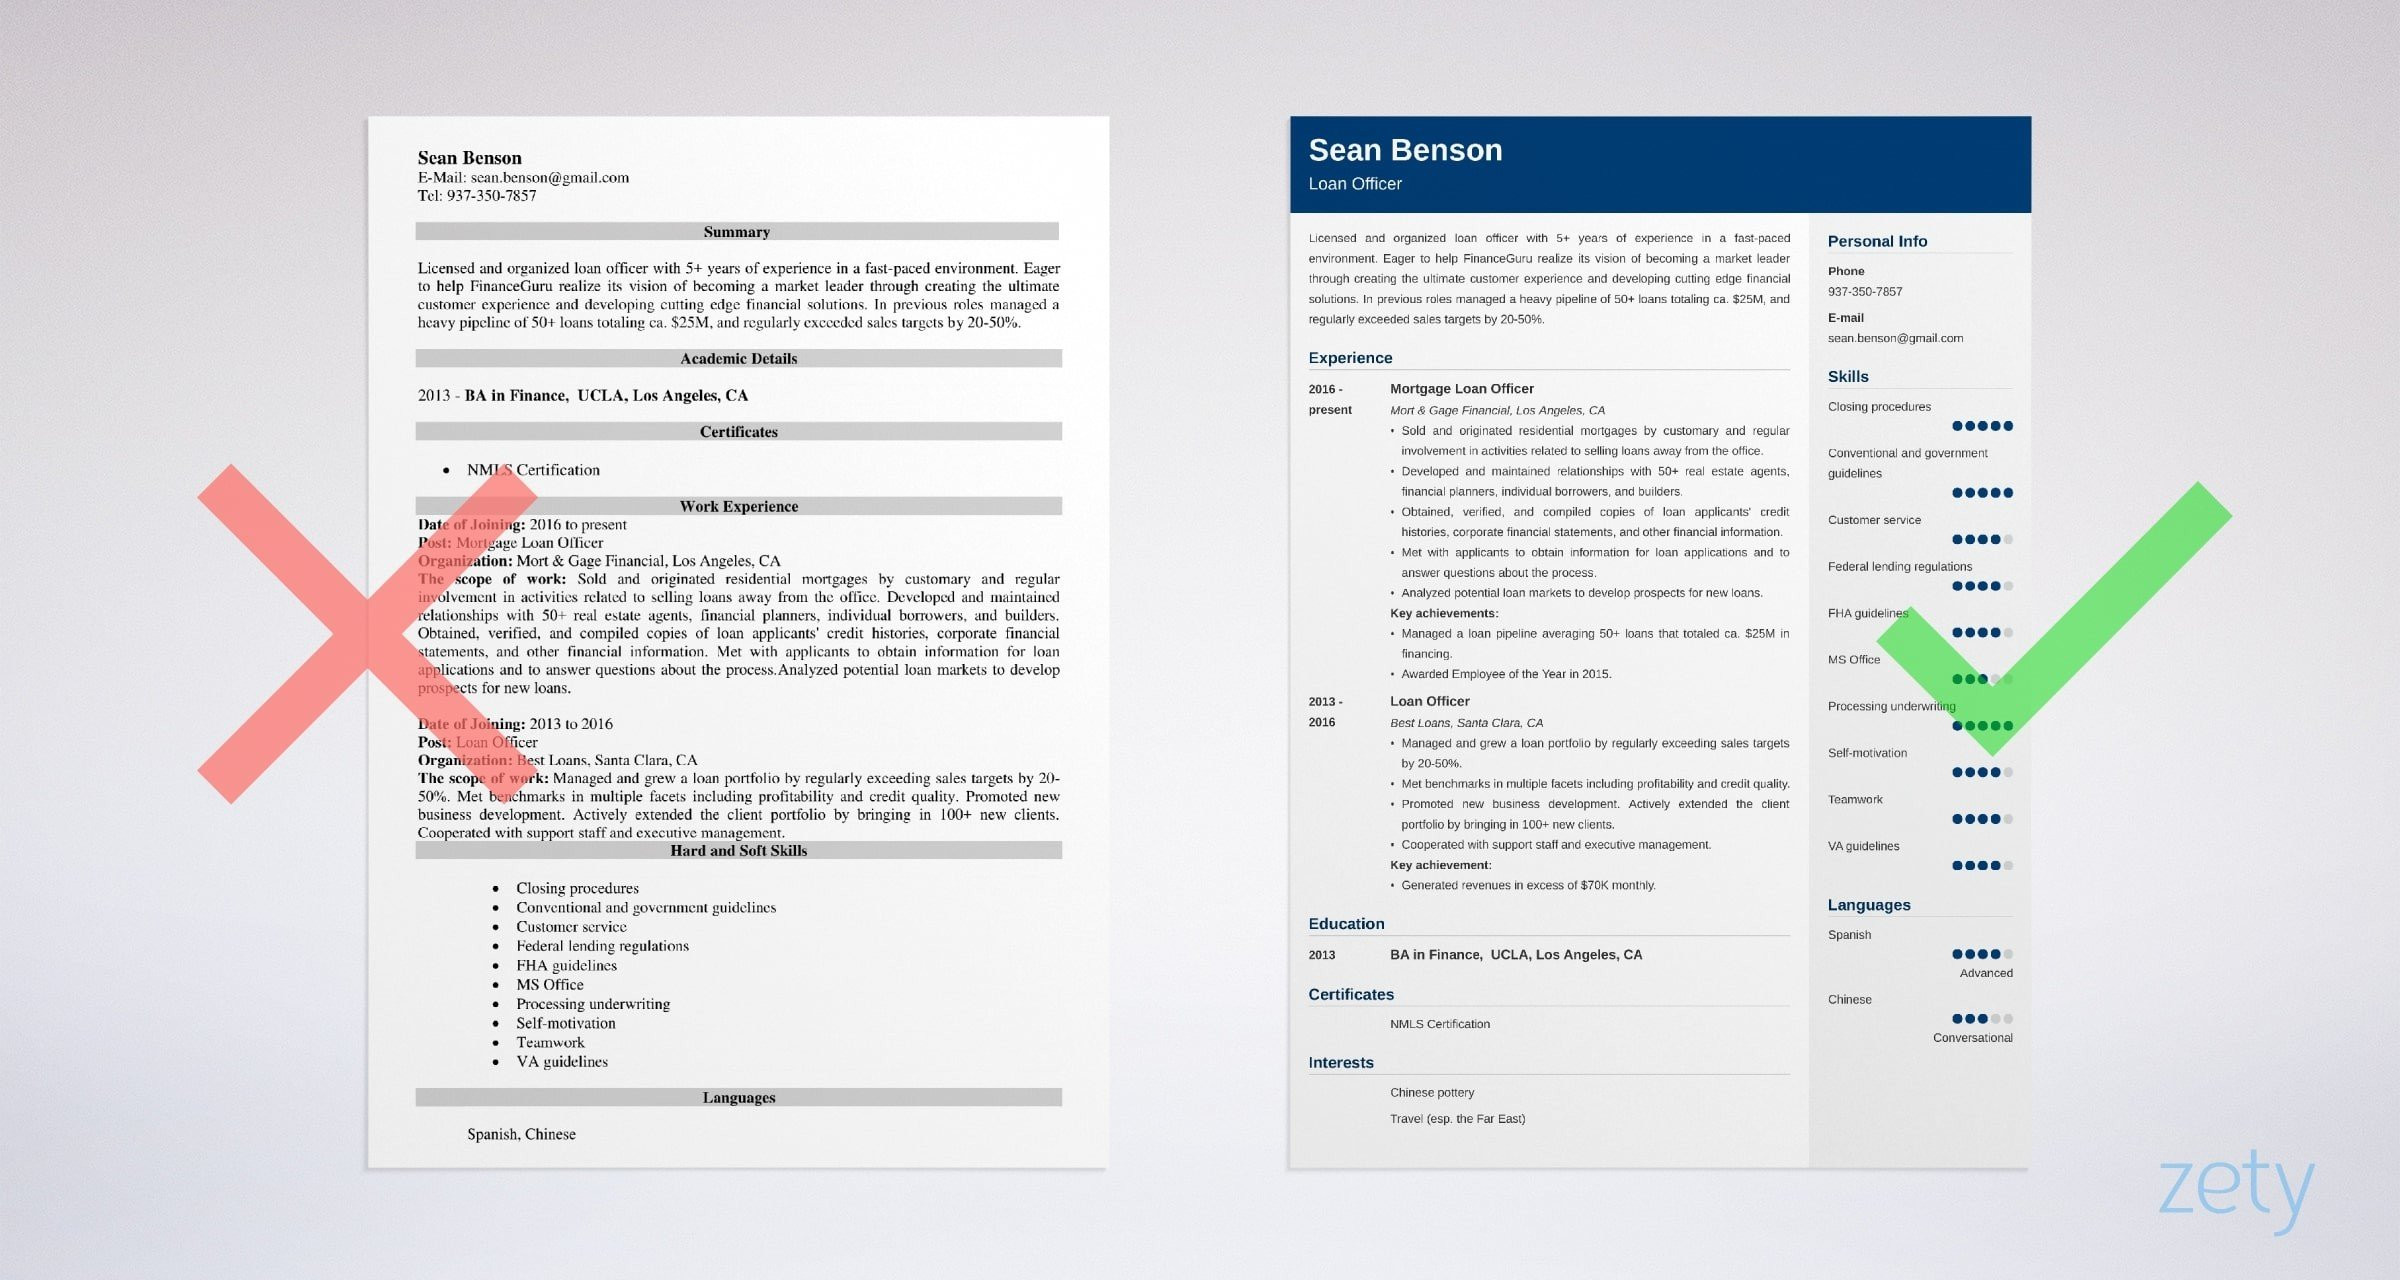 Outstanding Sample Of A Mortgage Loans Officer Resume Loan Officer Resume Sample (with Job Description & Skills)